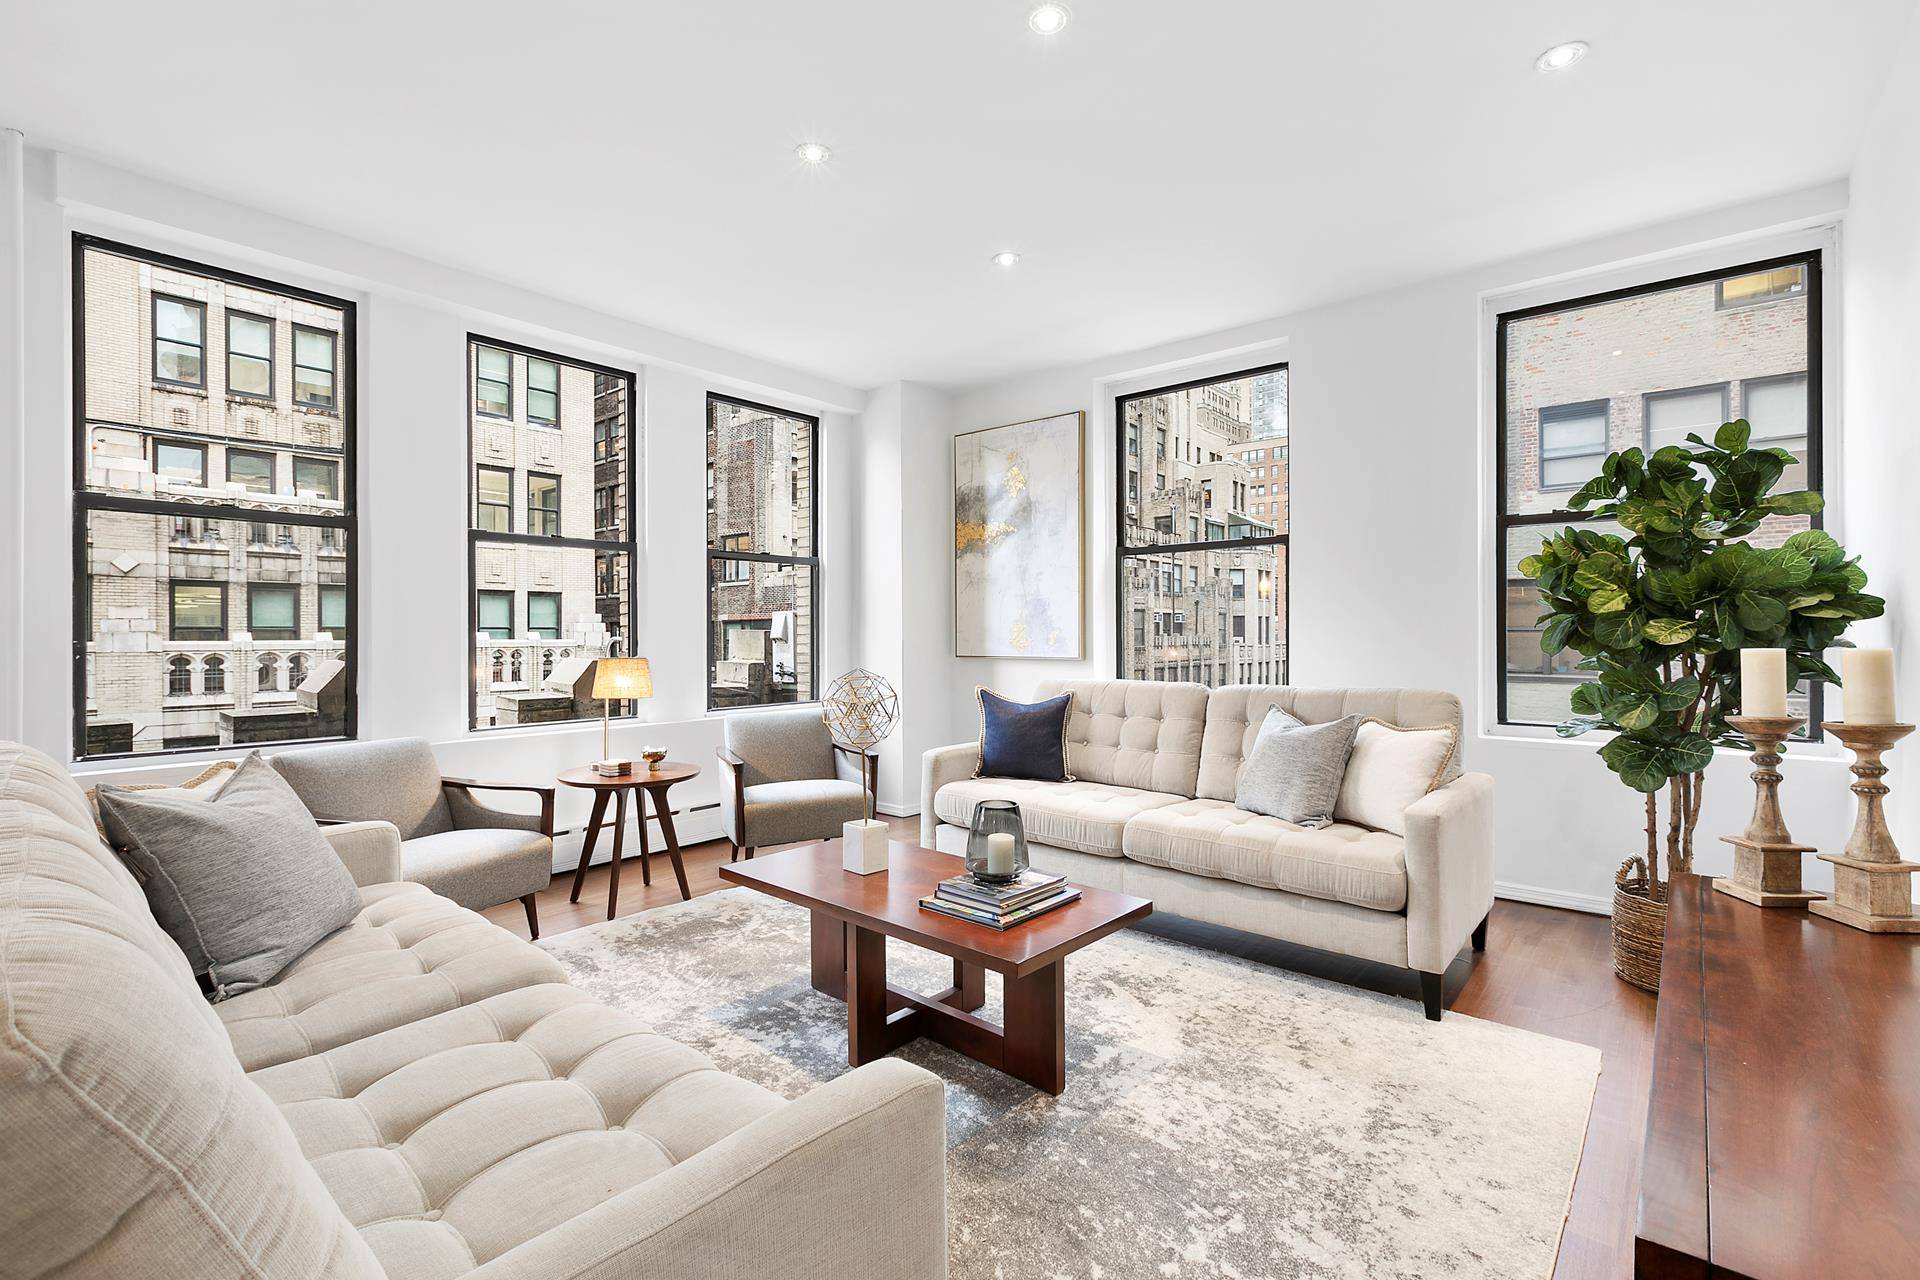 BACK ON MARKET REDUCED PRICEEnjoy the best of urban living in this fabulous 1600sqft pre war LIVE WORK LOFT condominium highlighted by gracious proportions and compelling city views from north ...